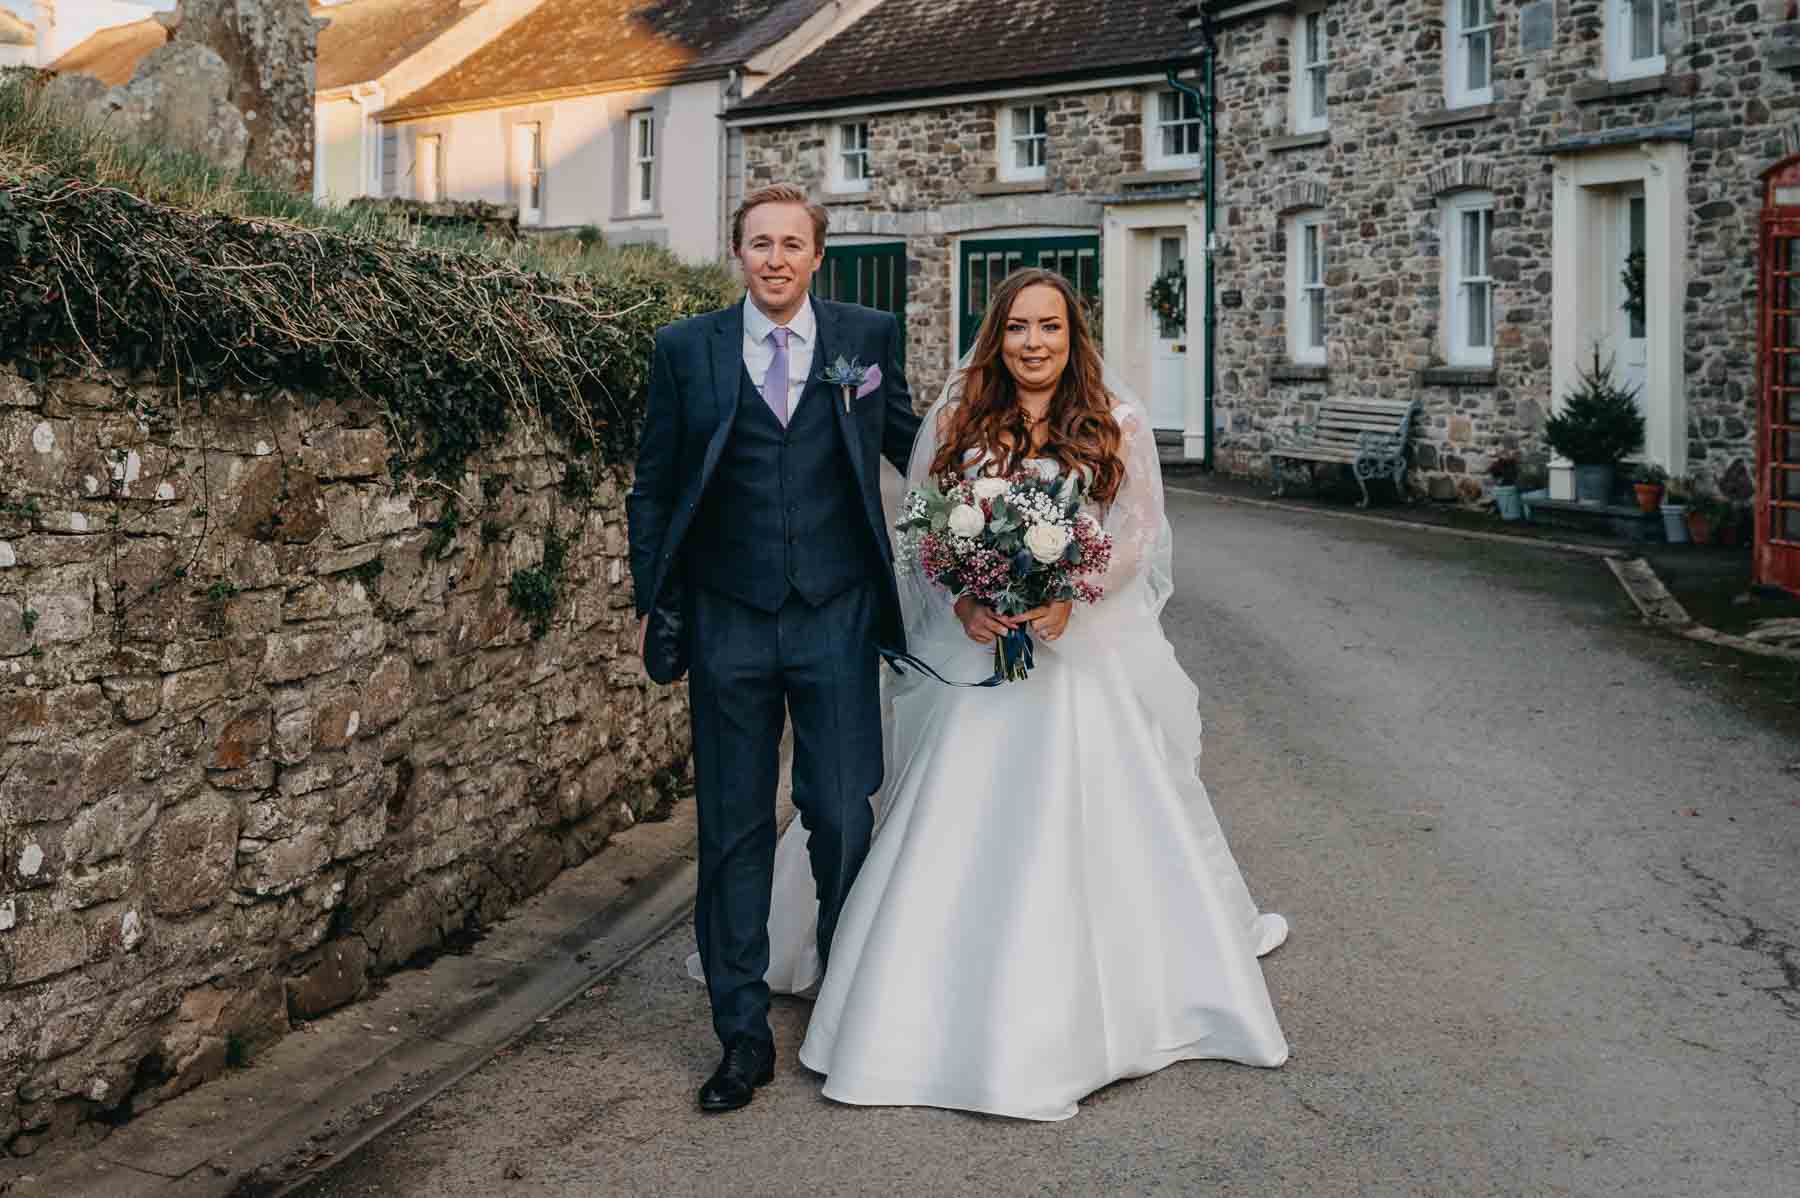 Bride and Groom on the street in Myddfai - natural wedding photography Wales